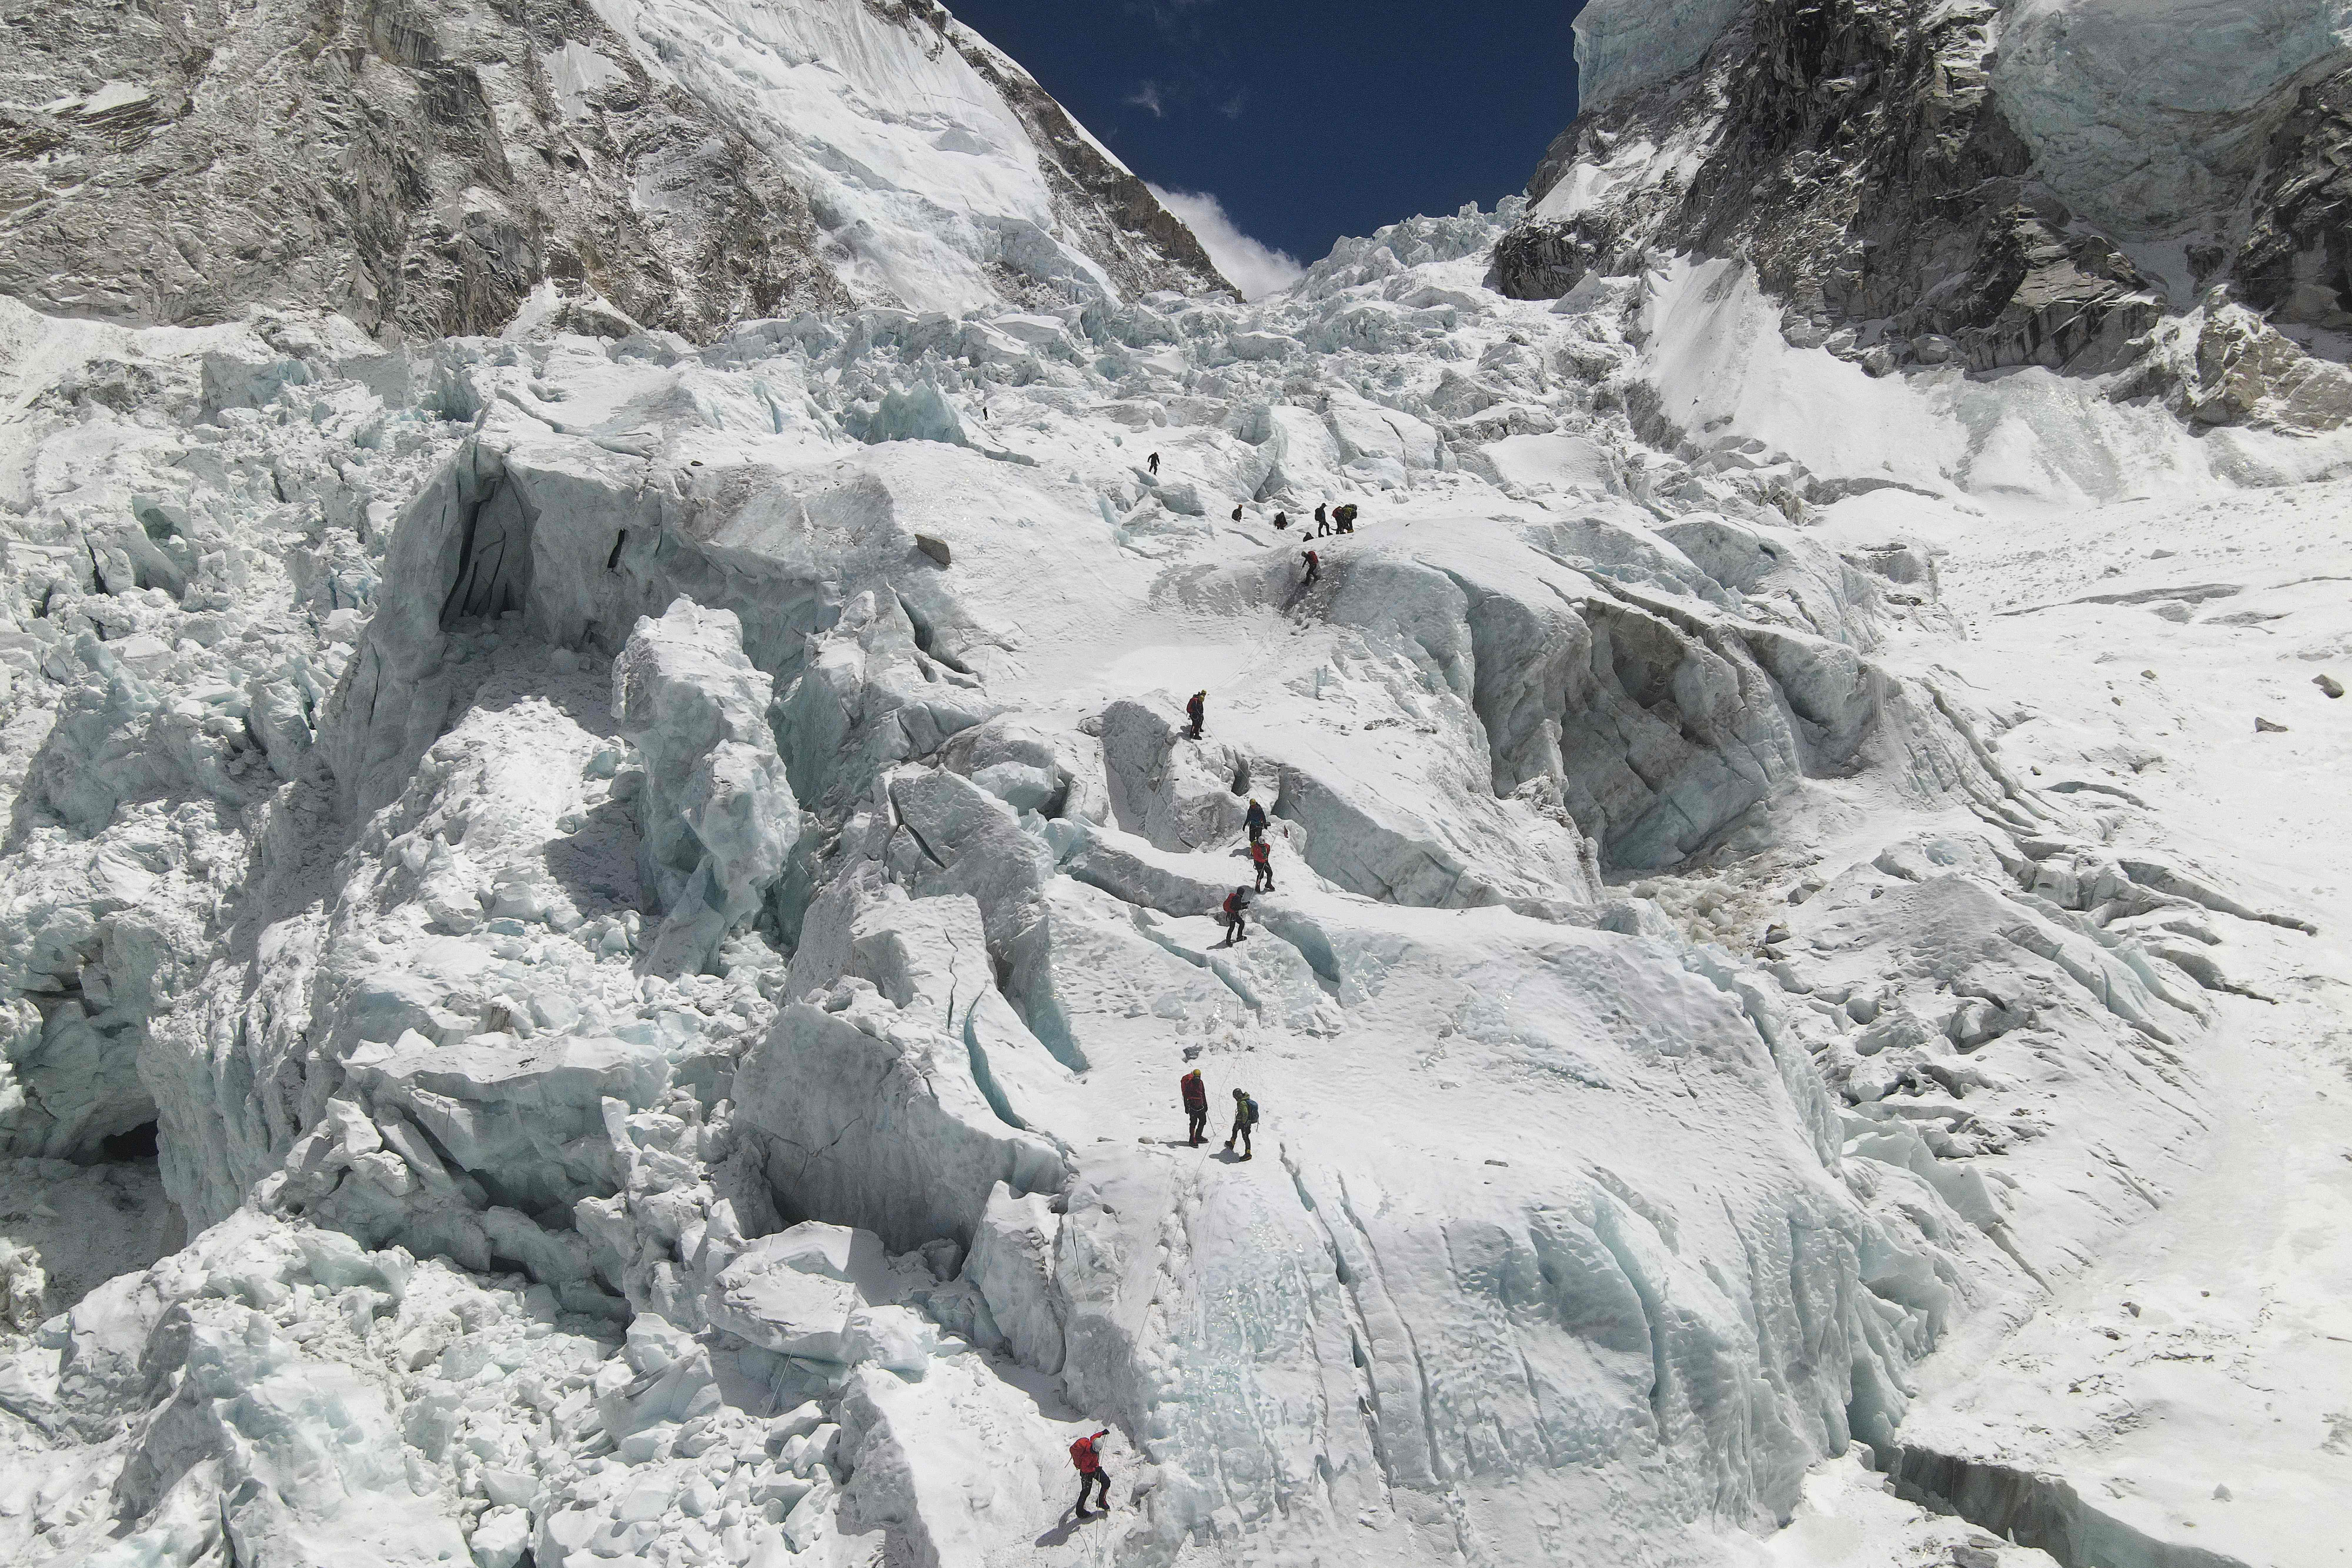 Climbers crossing the Khumbu icefall of Everest, as seen from base camp, 140km northeast of Kathmandu